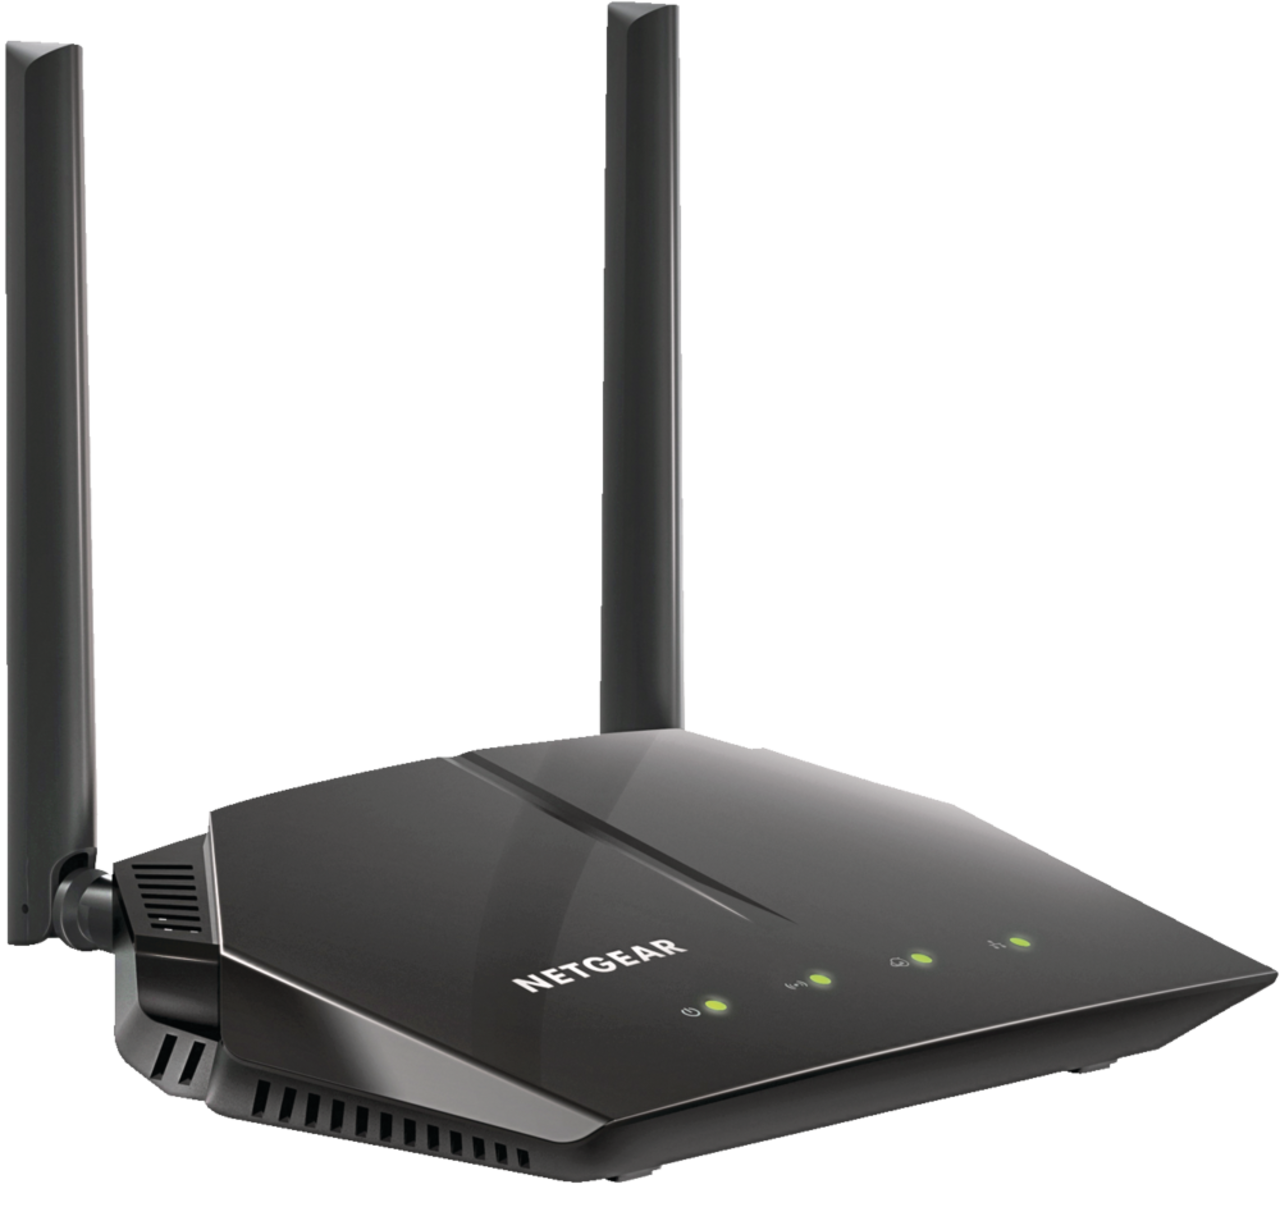 https://media-www.canadiantire.ca/product/living/electronics/home-communications/0694093/netgear-ac1200-router-ac5190e7-dbb2-4d6d-bc63-9a69dd4d9cbb.png?imdensity=1&imwidth=640&impolicy=mZoom